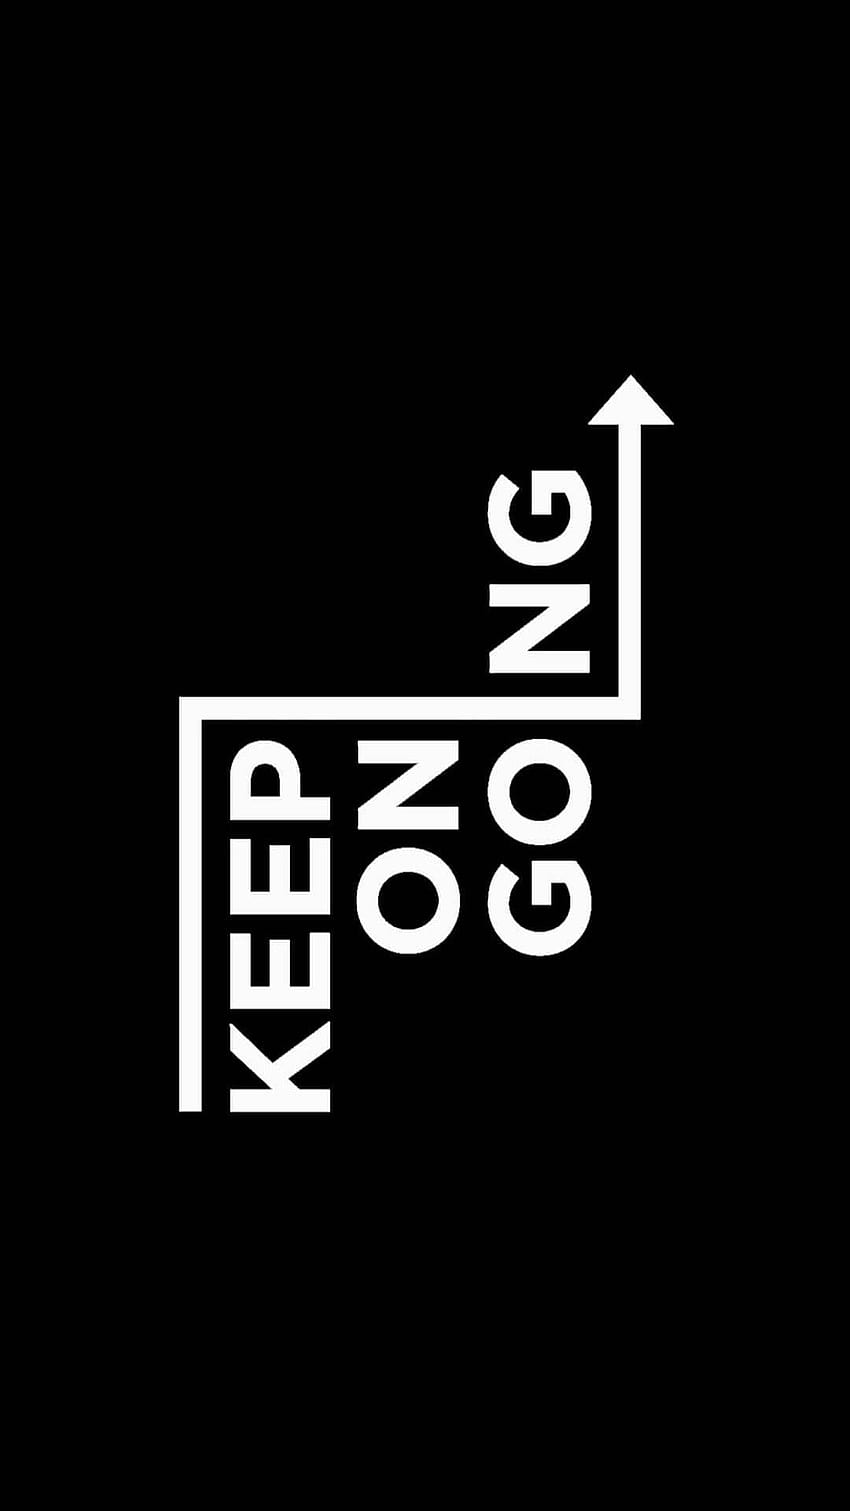 Keep on going, iphone motivation HD phone wallpaper